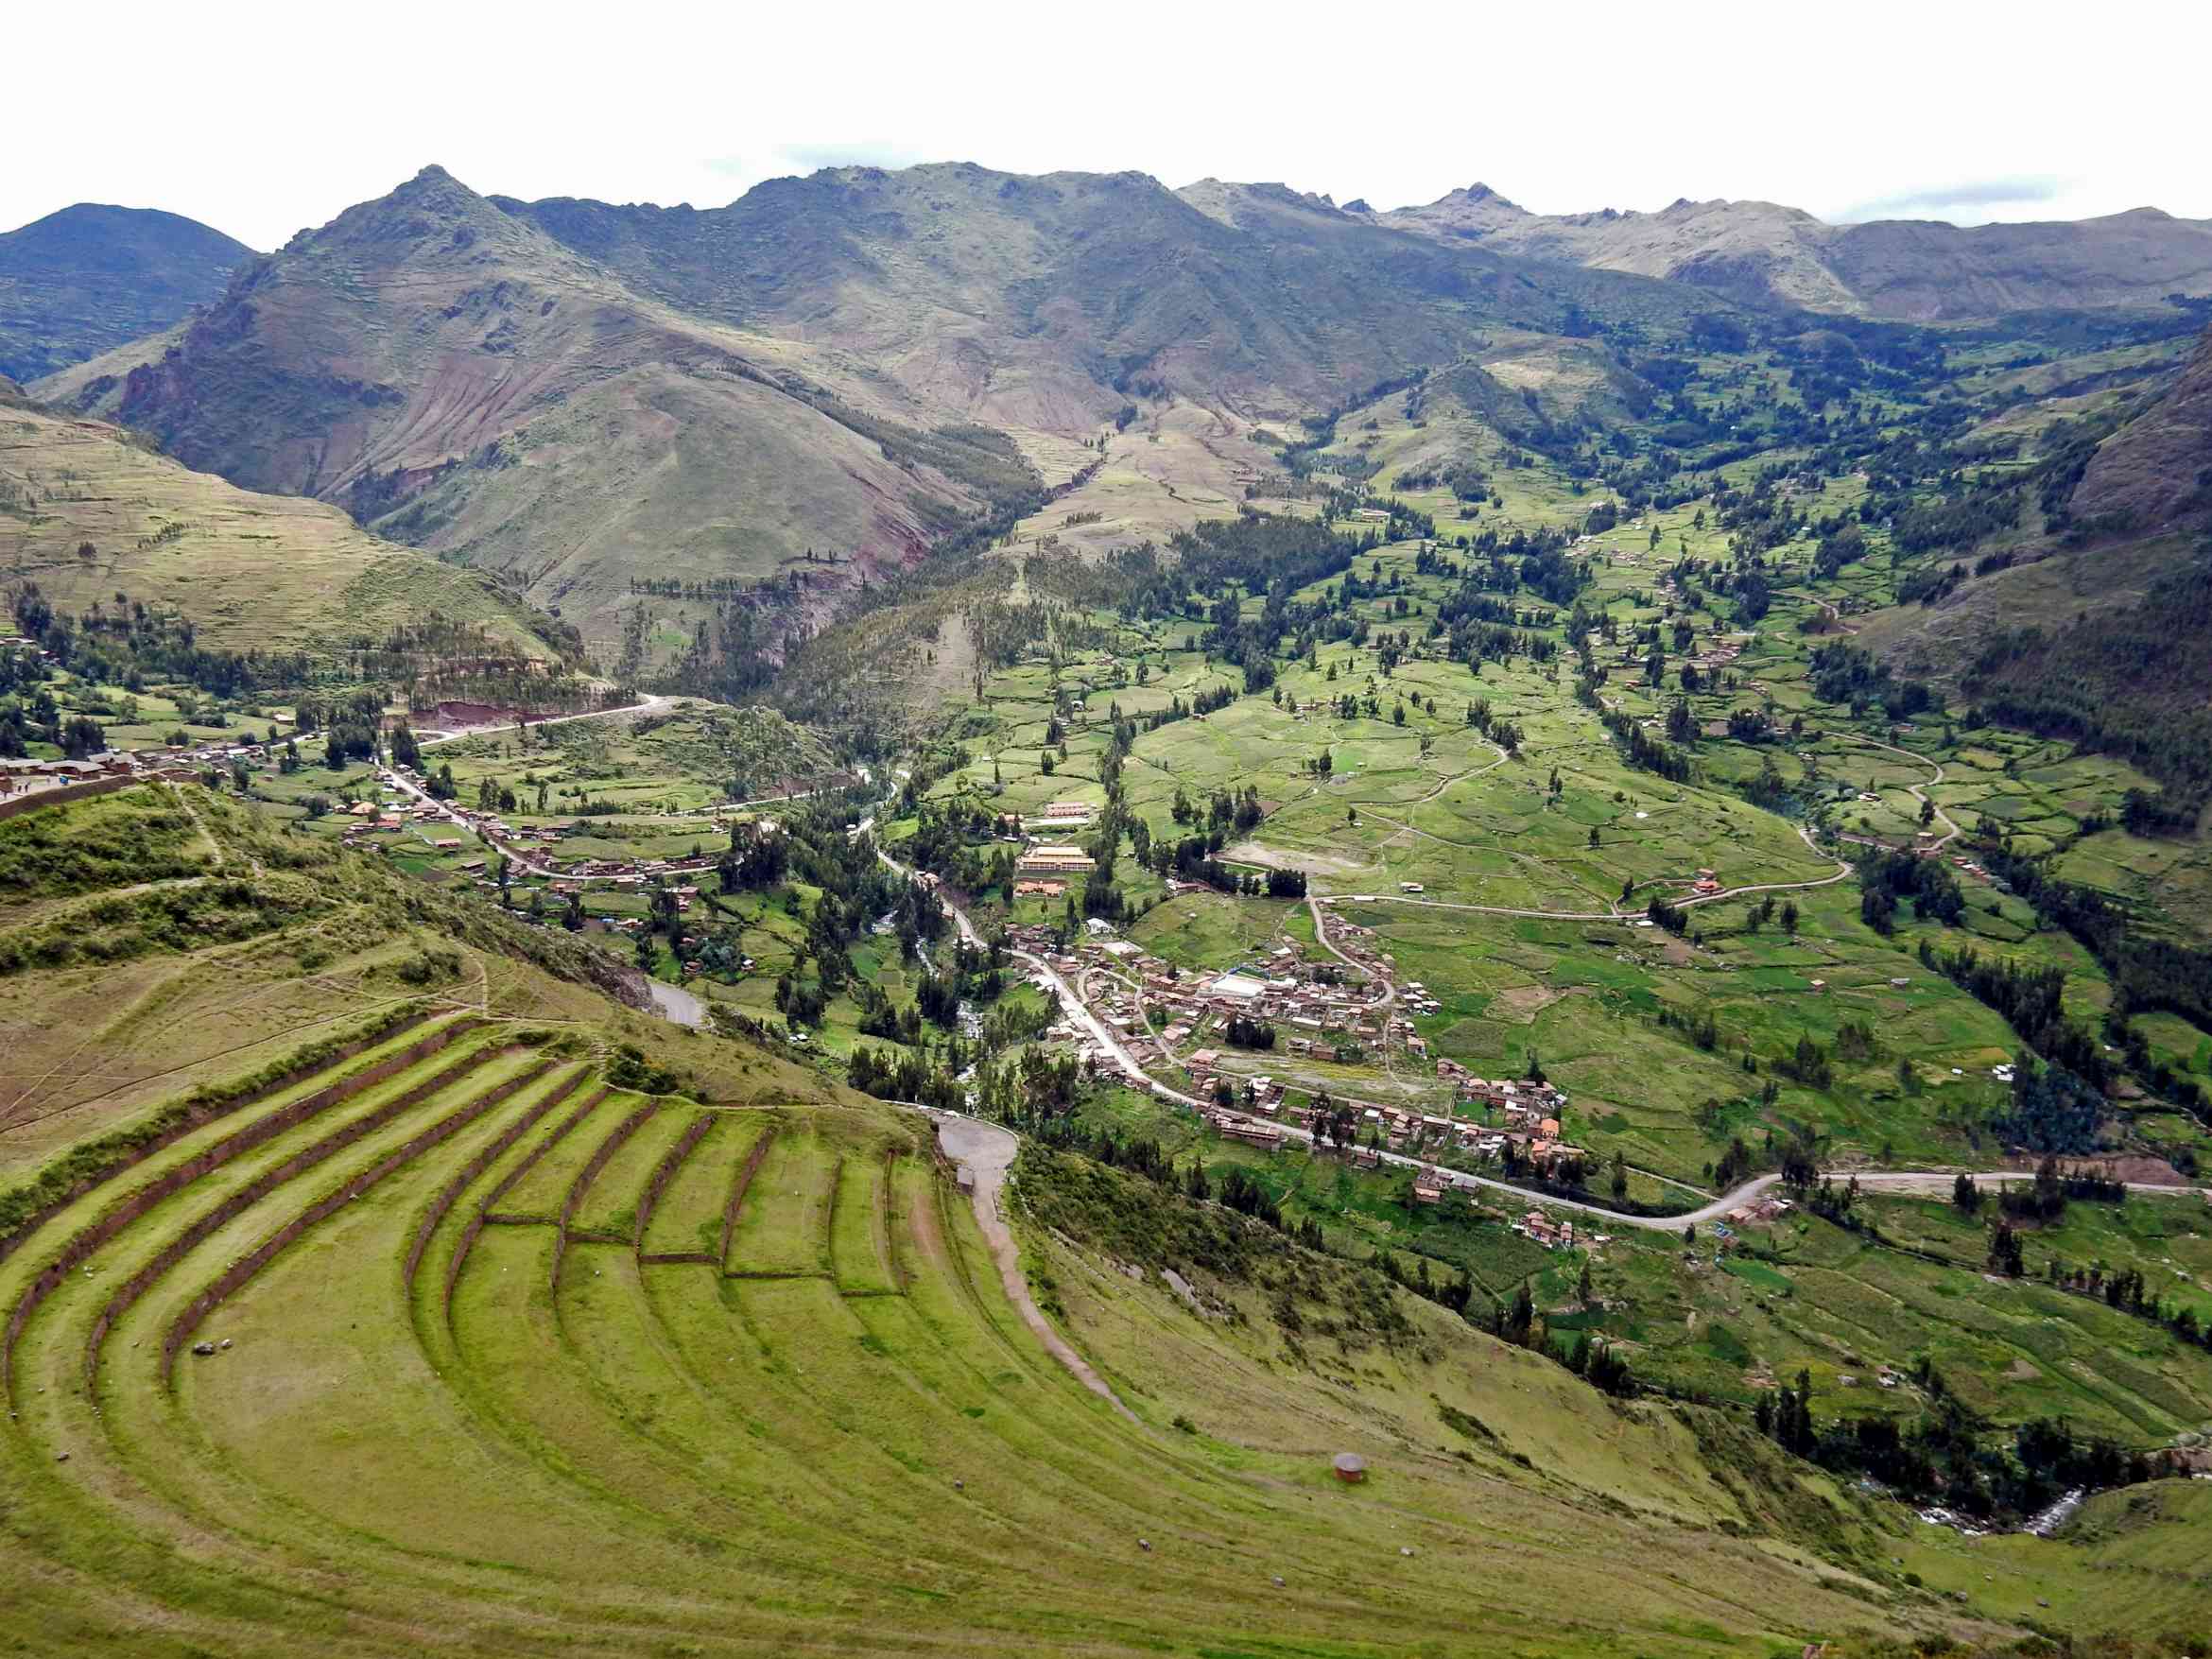 The terraces farm area of Pisac with some old houses 